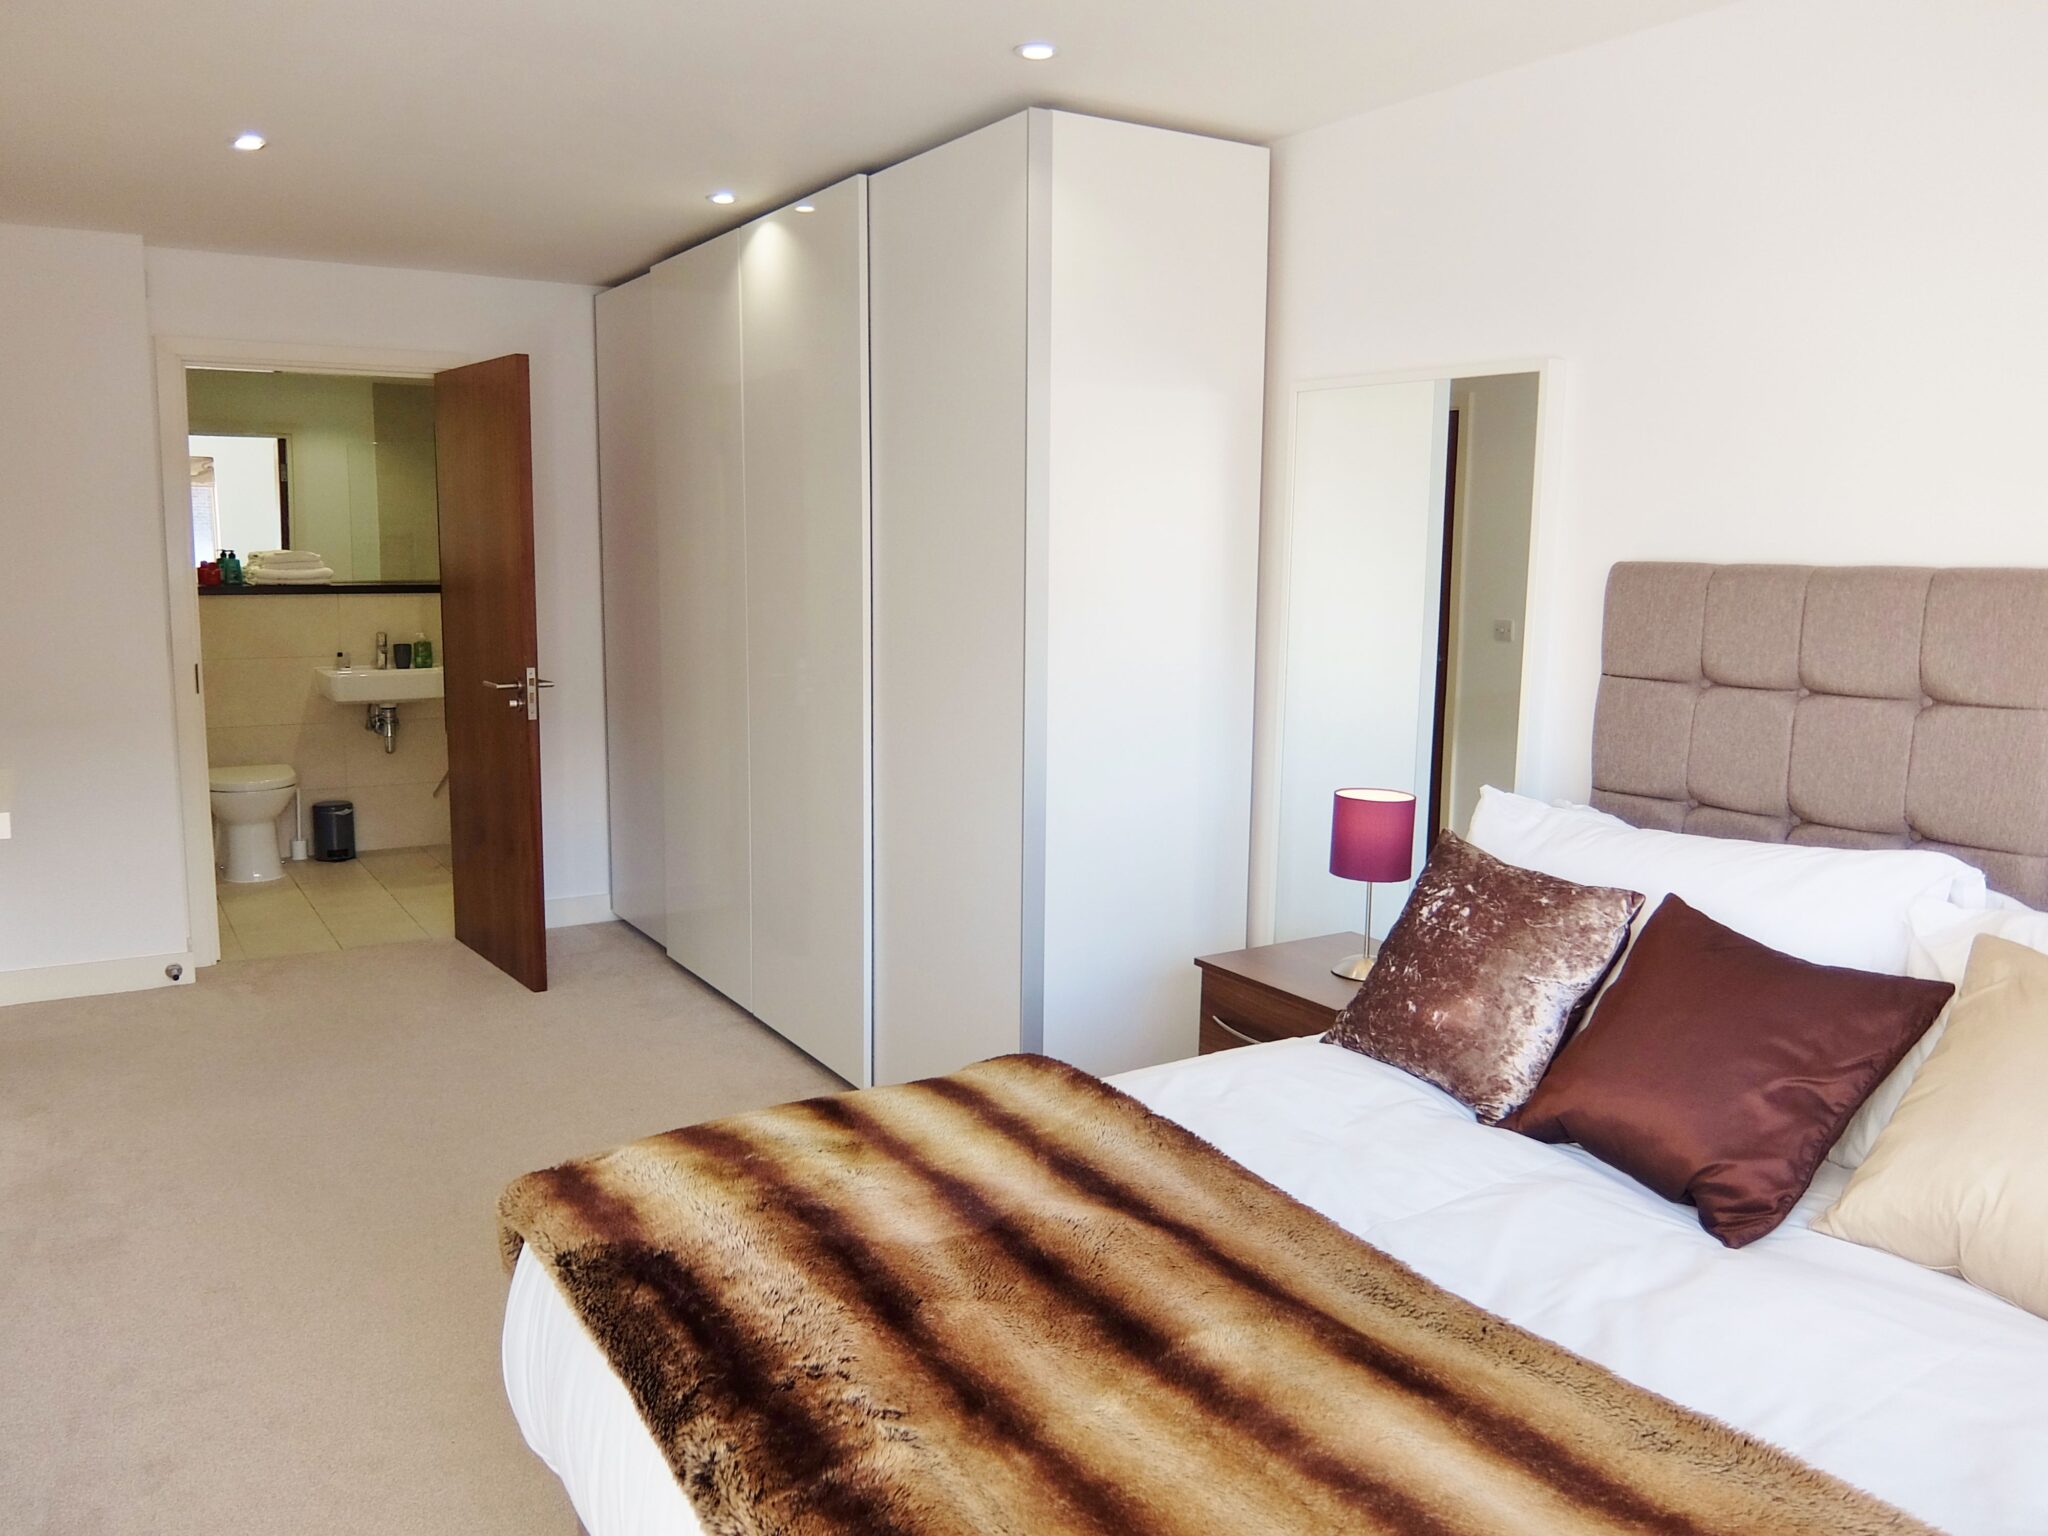 Ruislip Serviced Apartments a Modern 2 and 3 bedroom apartments in Ruislip centre, near transport and amenities. Enjoy a balcony, and Wi-Fi.